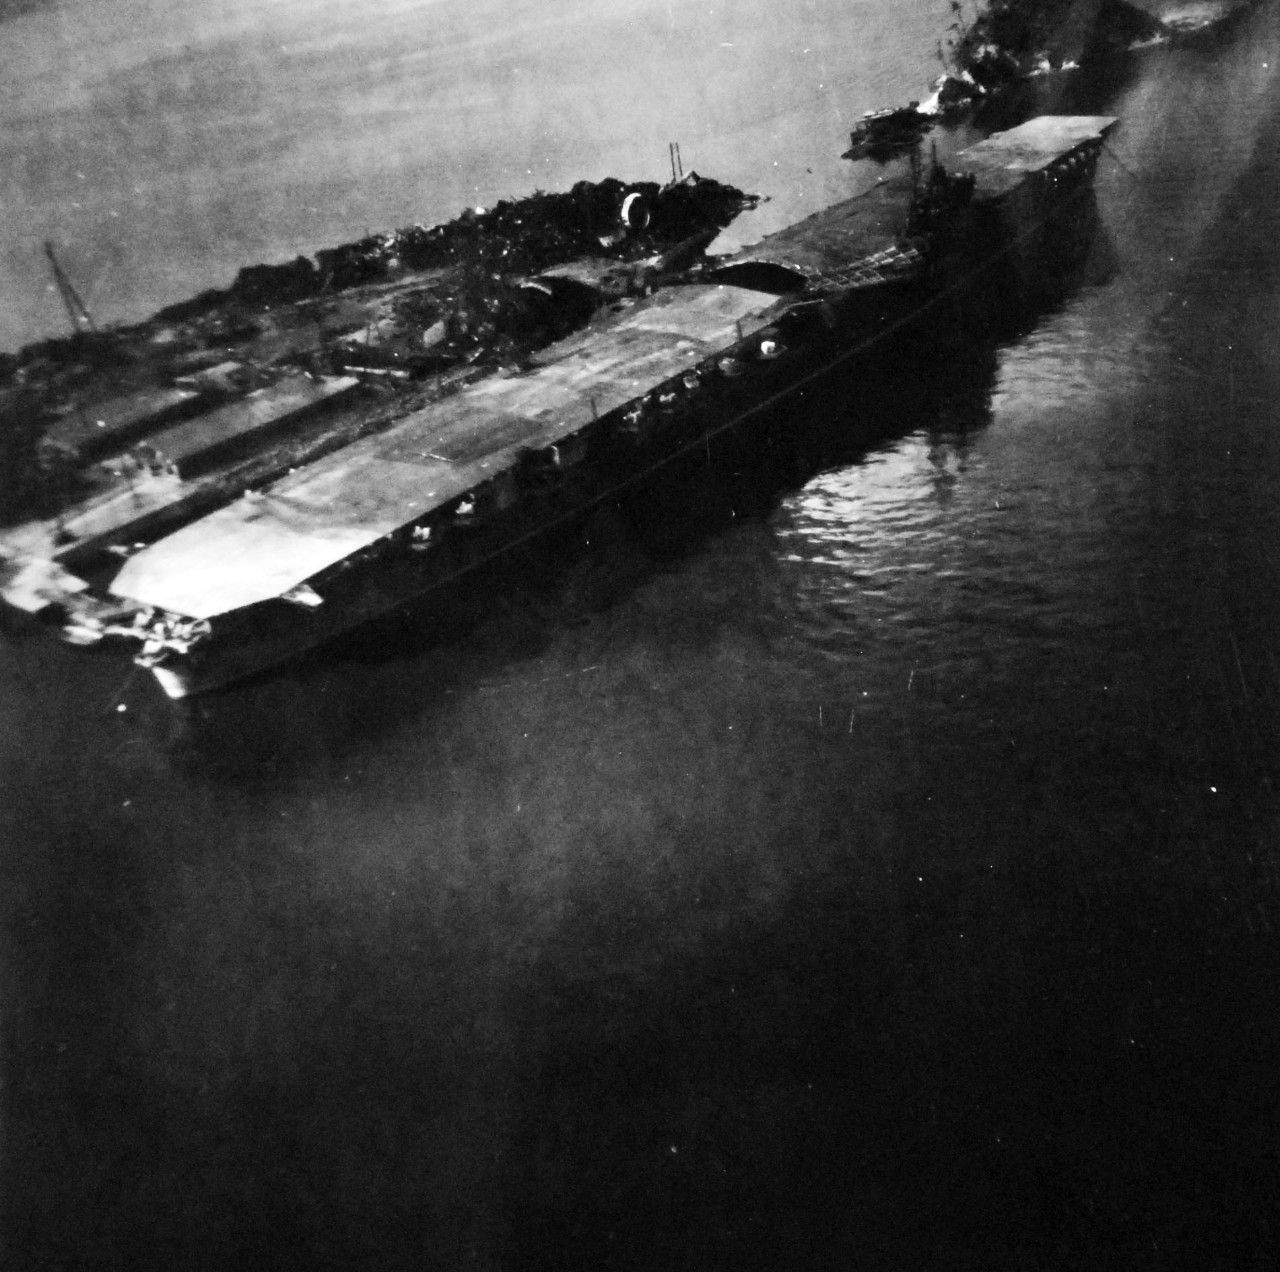 80-G-349907:   Damaged Japanese ships in Kure Harbor, Japan.  Shown is Japanese aircraft carrier Katsuragi.   Photographed by aircraft from USS St. George (AV 16), 14 October 1945.  (6/19/2014). 